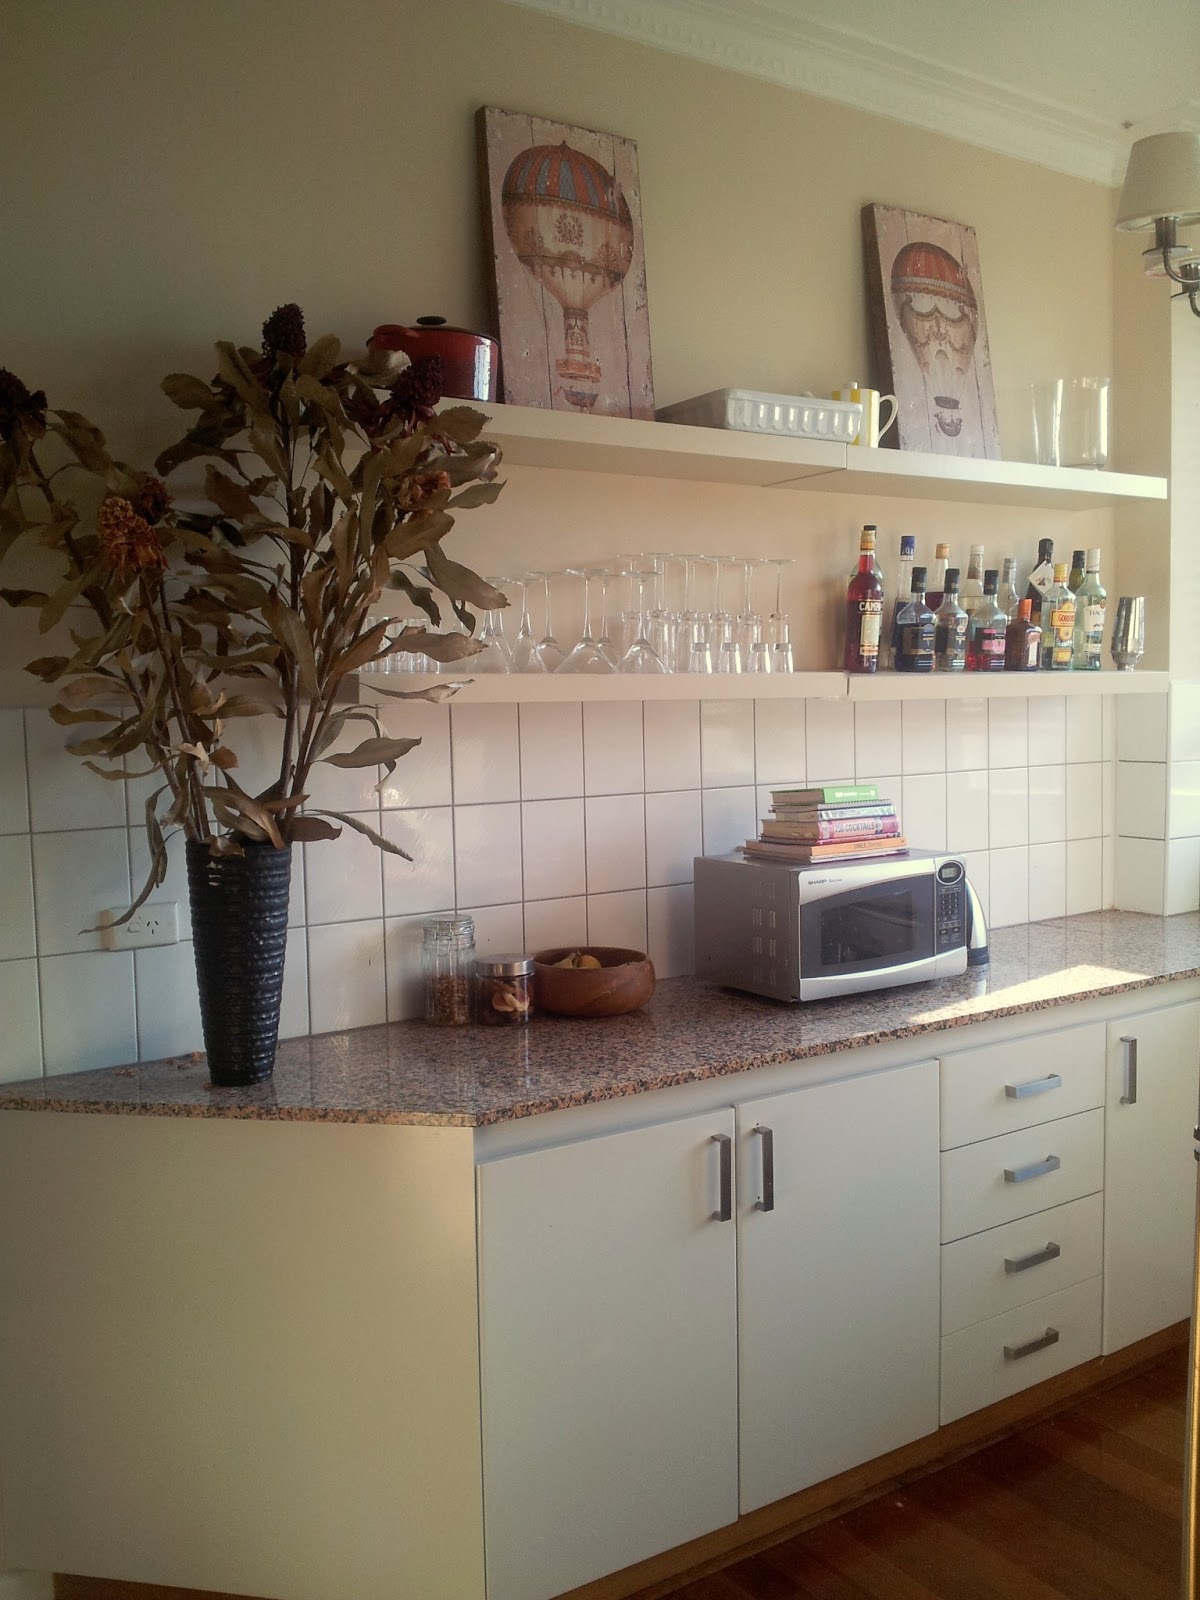 Ikea Hack: how to install Ikea Lack floating shelves in the kitchen